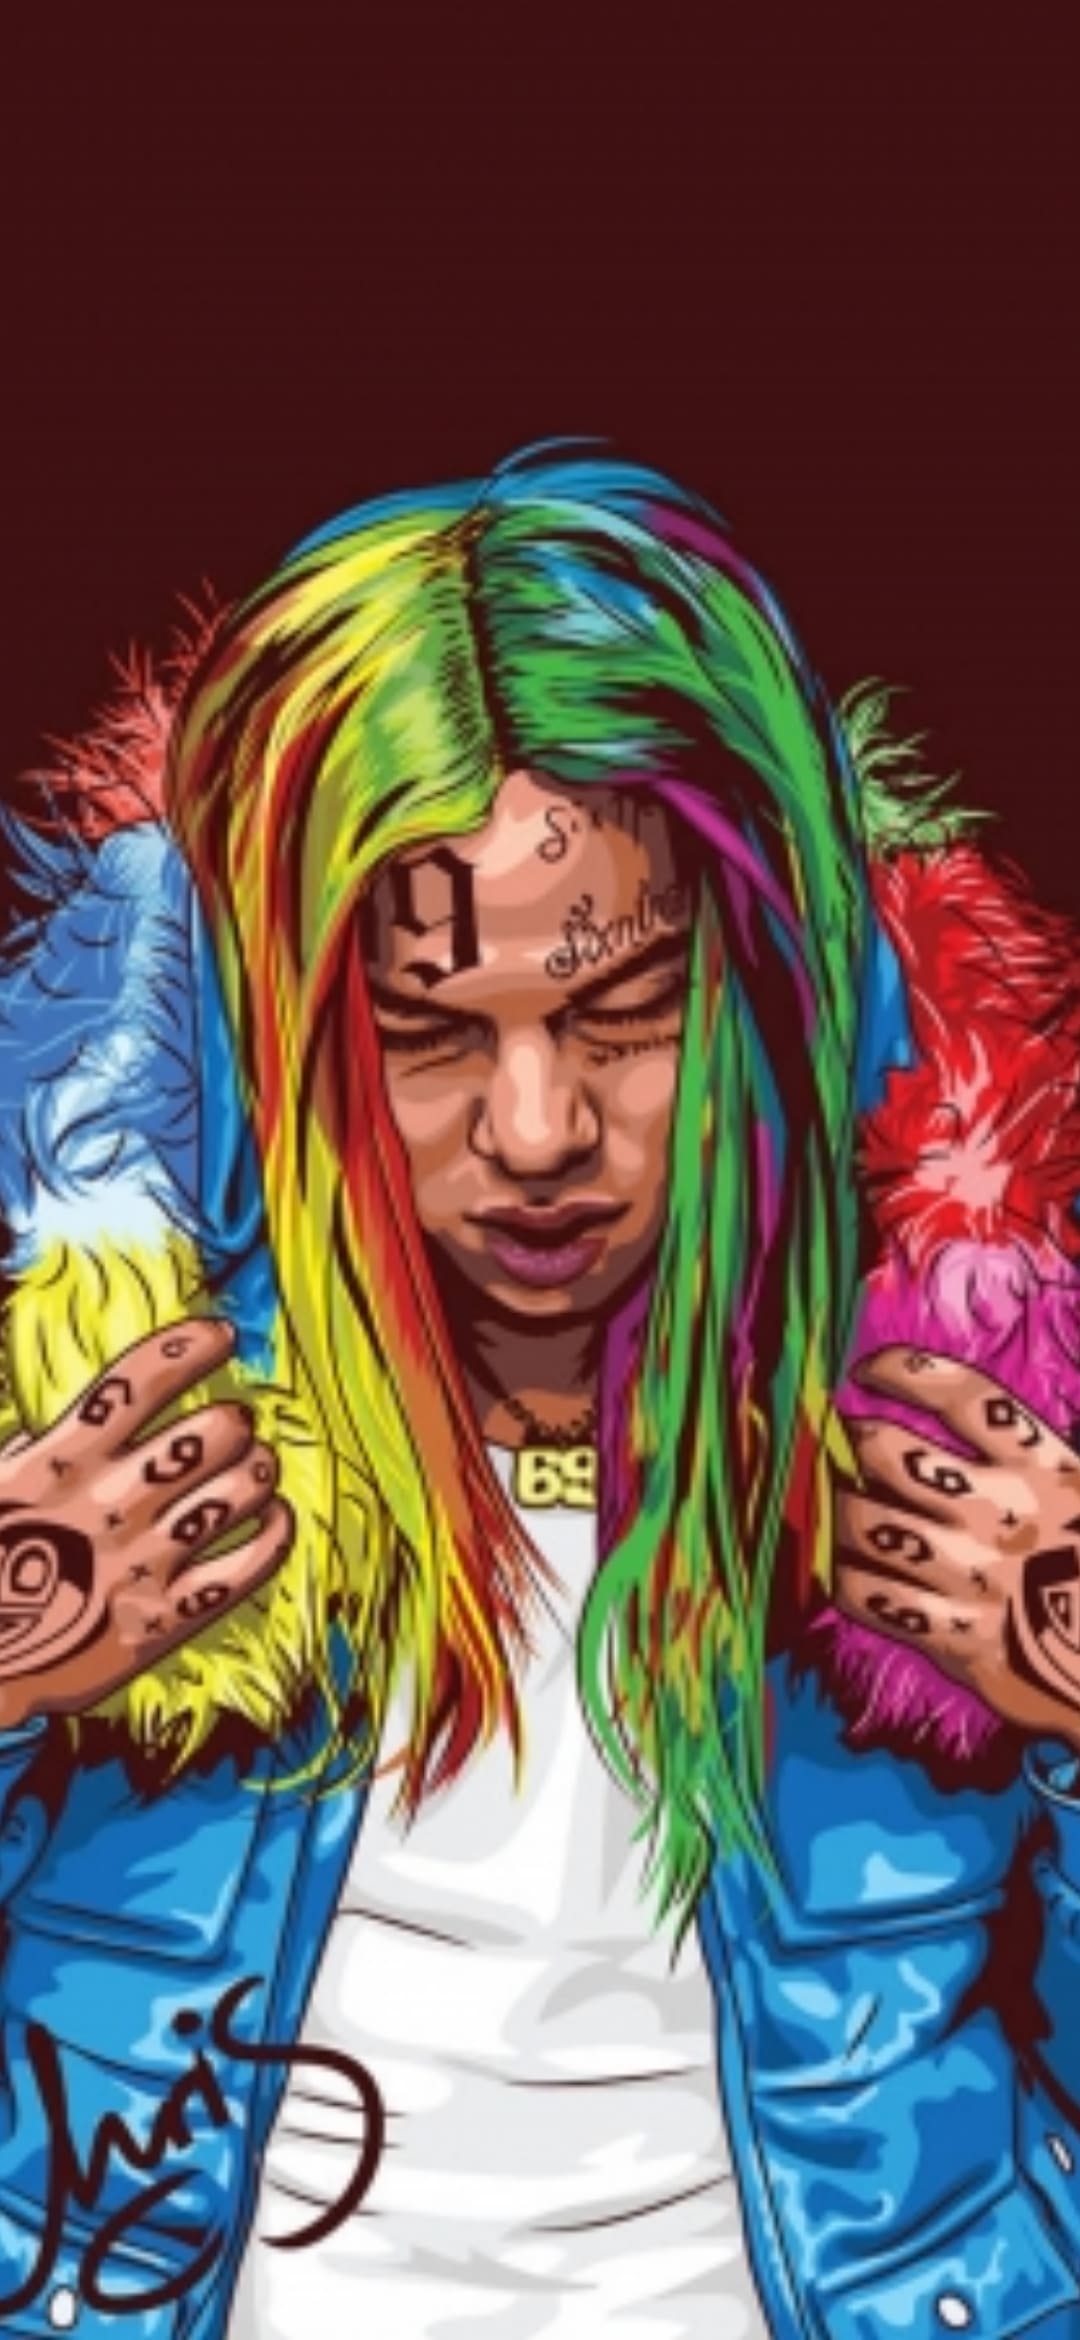 Free Download 6ix9ine Wallpapers Getty Wallpapers [1080x2340] For Your Desktop Mobile And Tablet